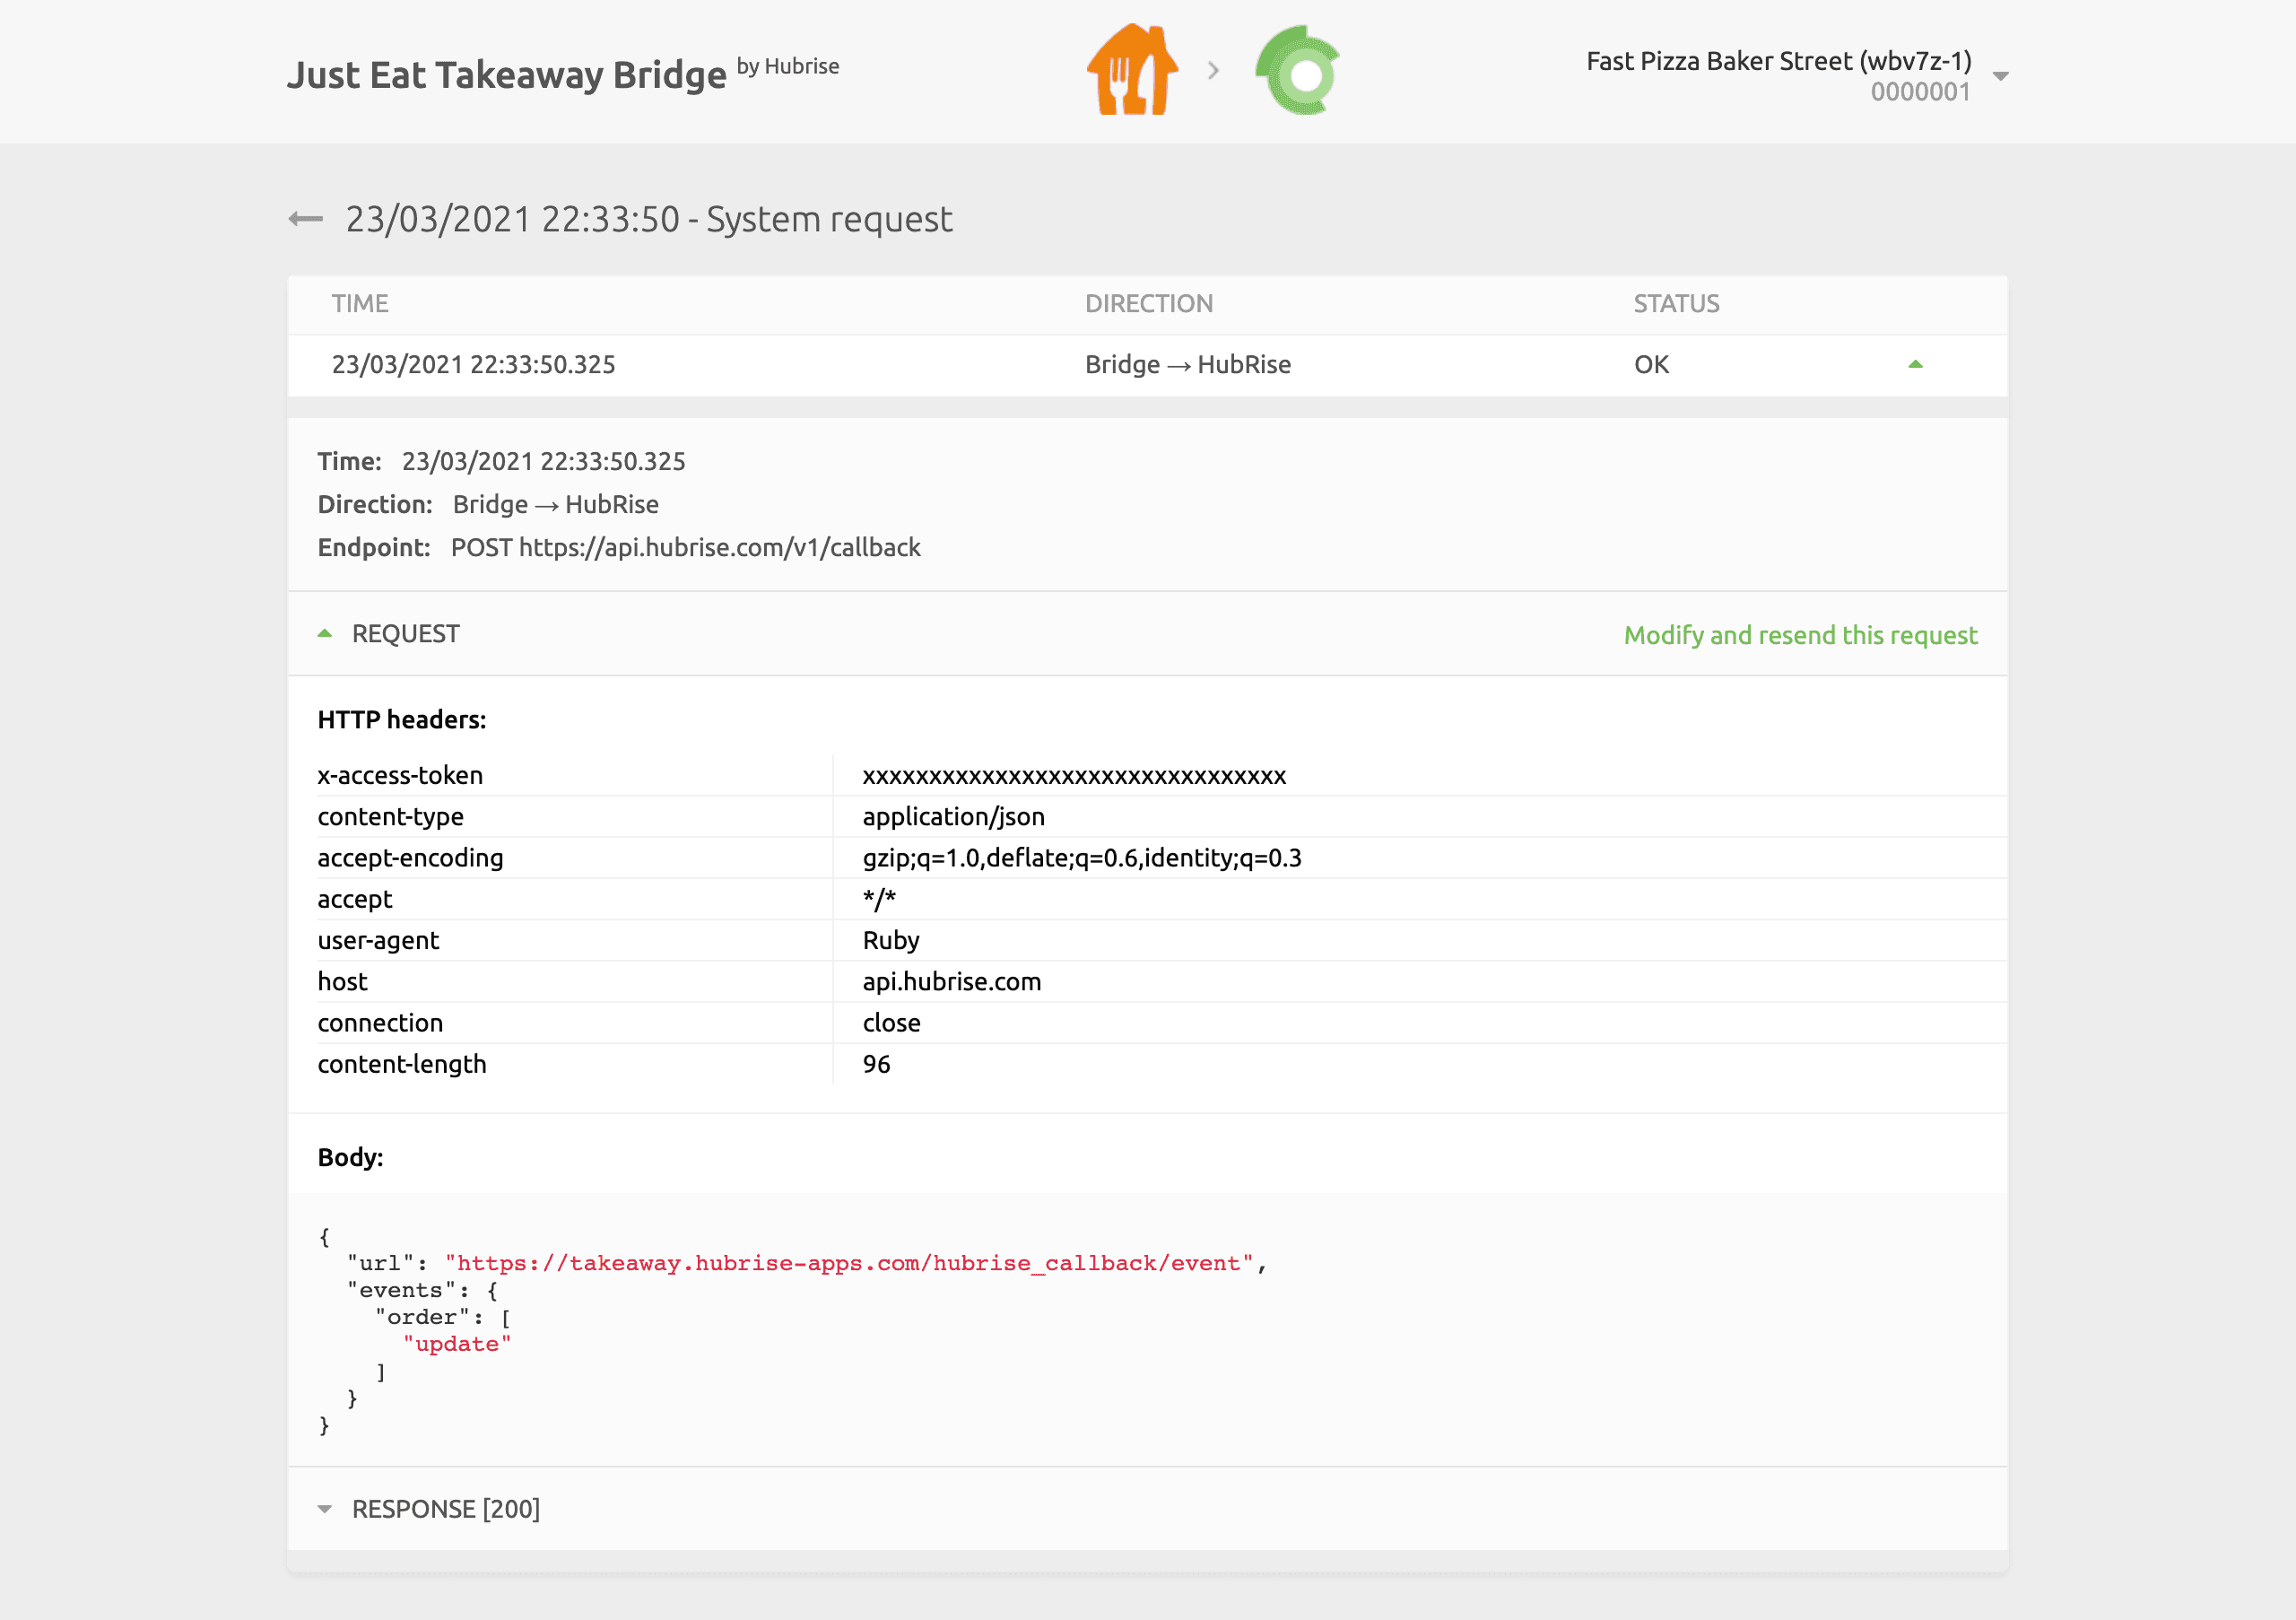 System request page on Just Eat Takeaway Bridge